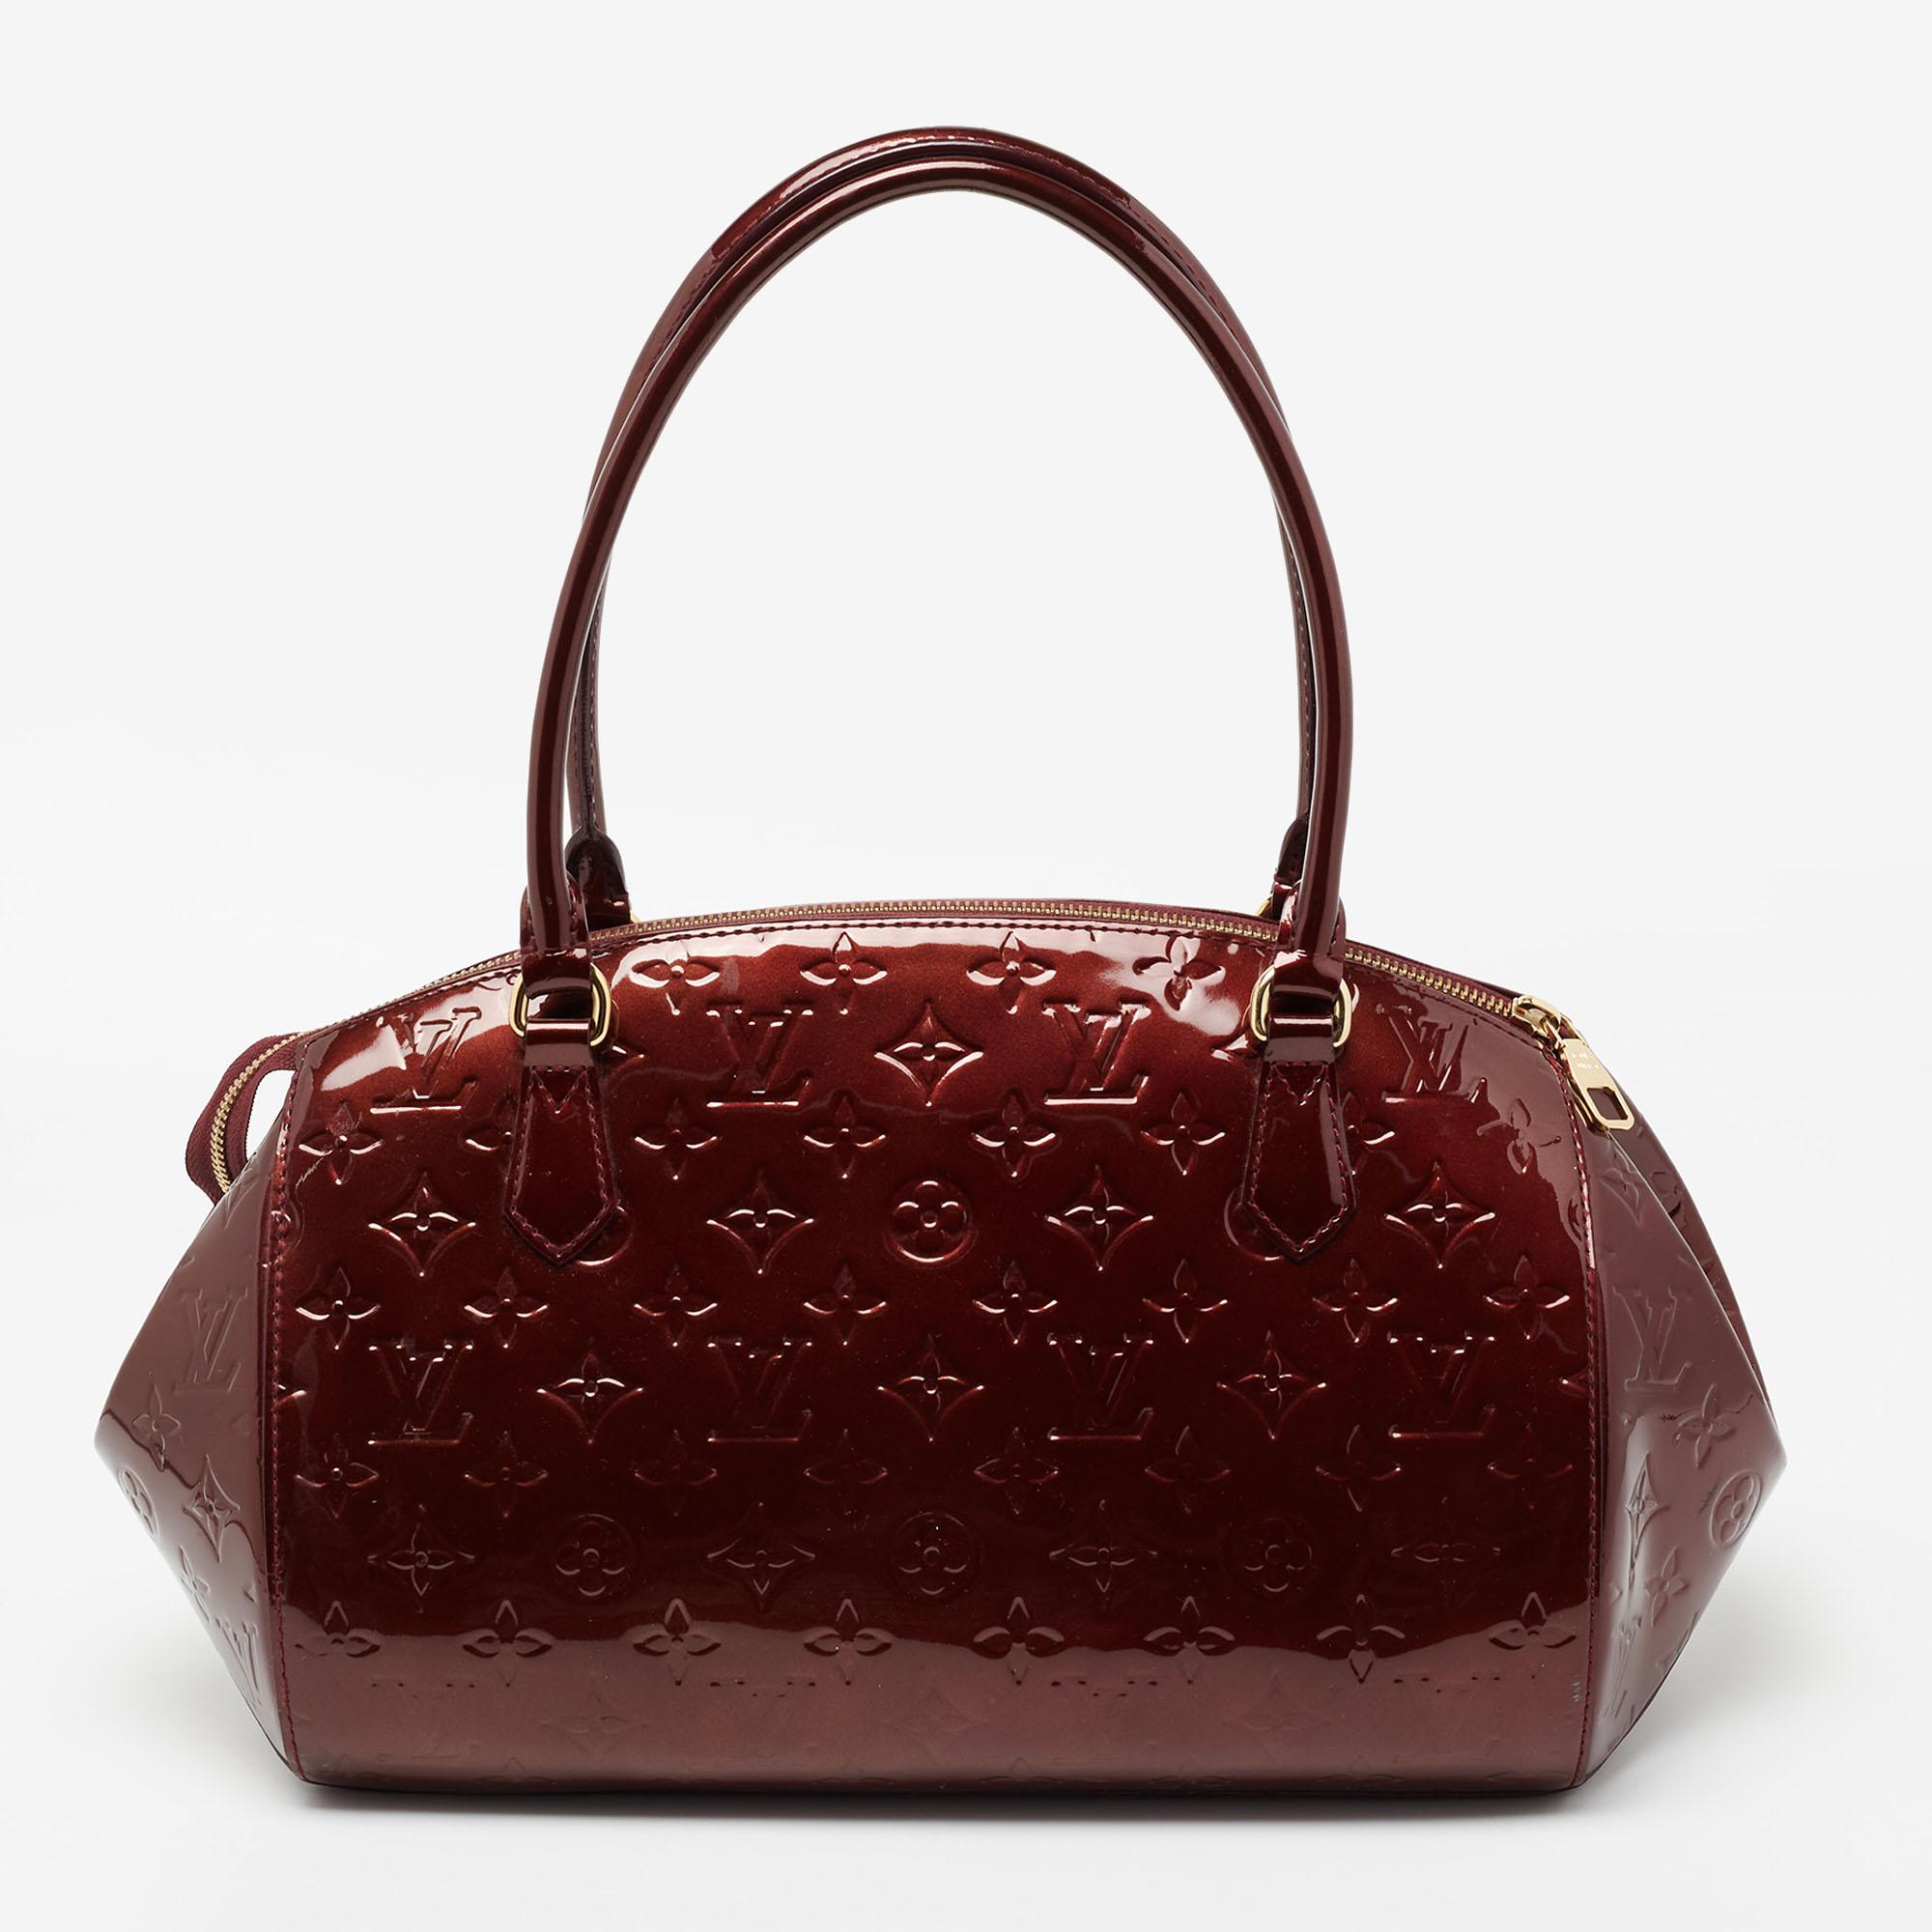 The Vernis line from Louis Vuitton was originally released in 1998. Today, these designs continue to inspire. Made with Monogram Vernis, this Sherwood is matched with gold-tone hardware. Top handles make it comfortable to carry. This bag is designed